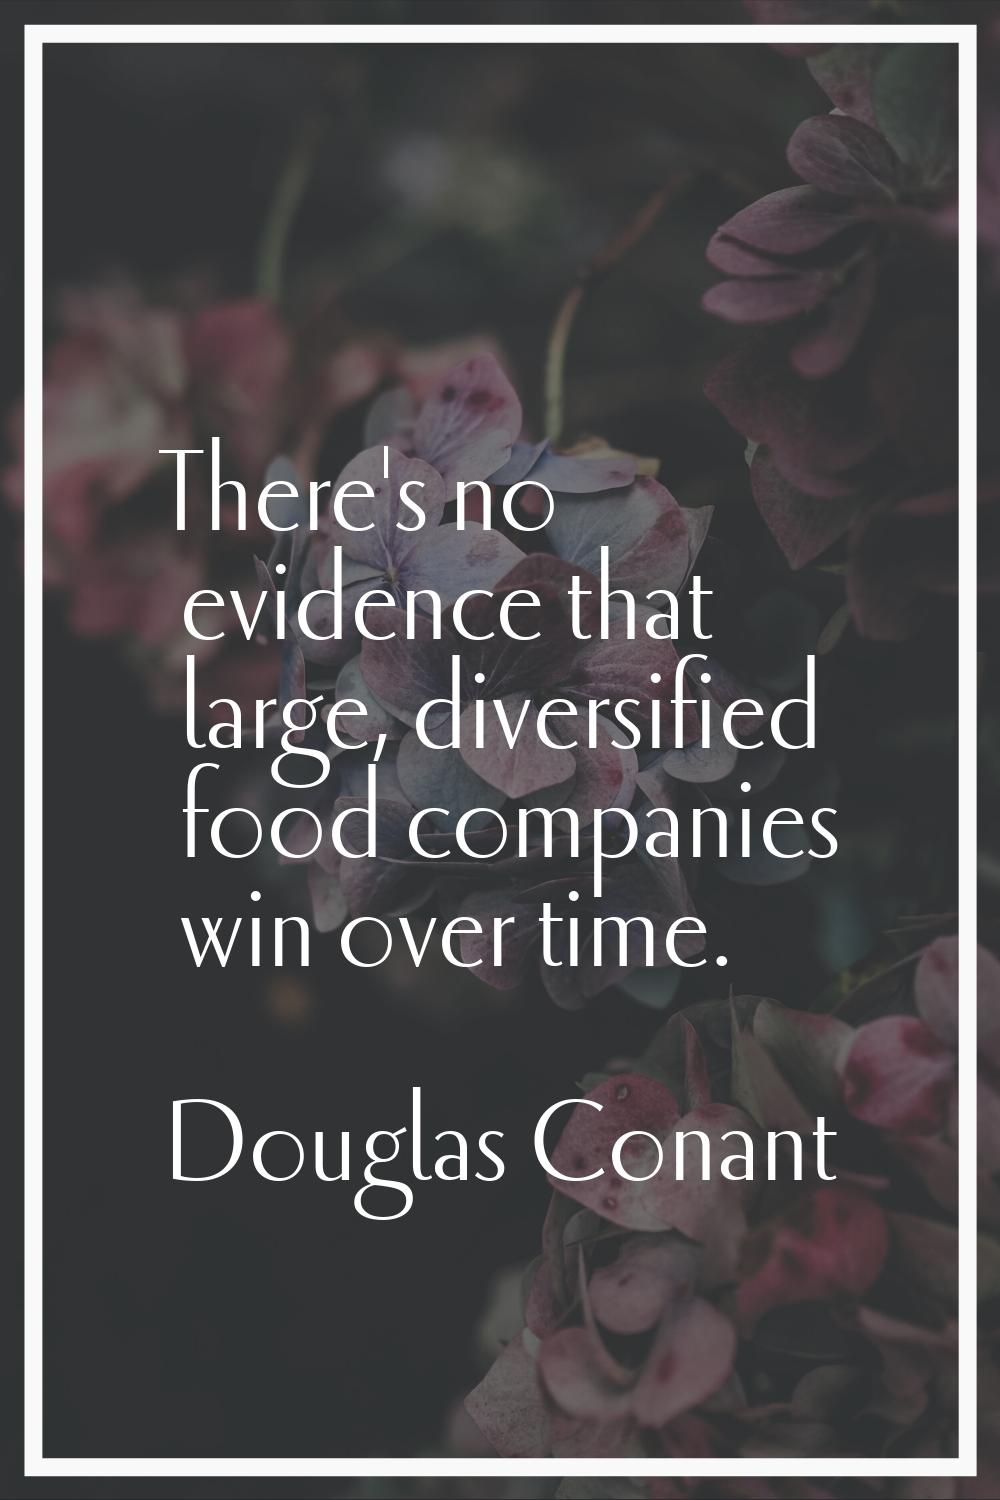 There's no evidence that large, diversified food companies win over time.